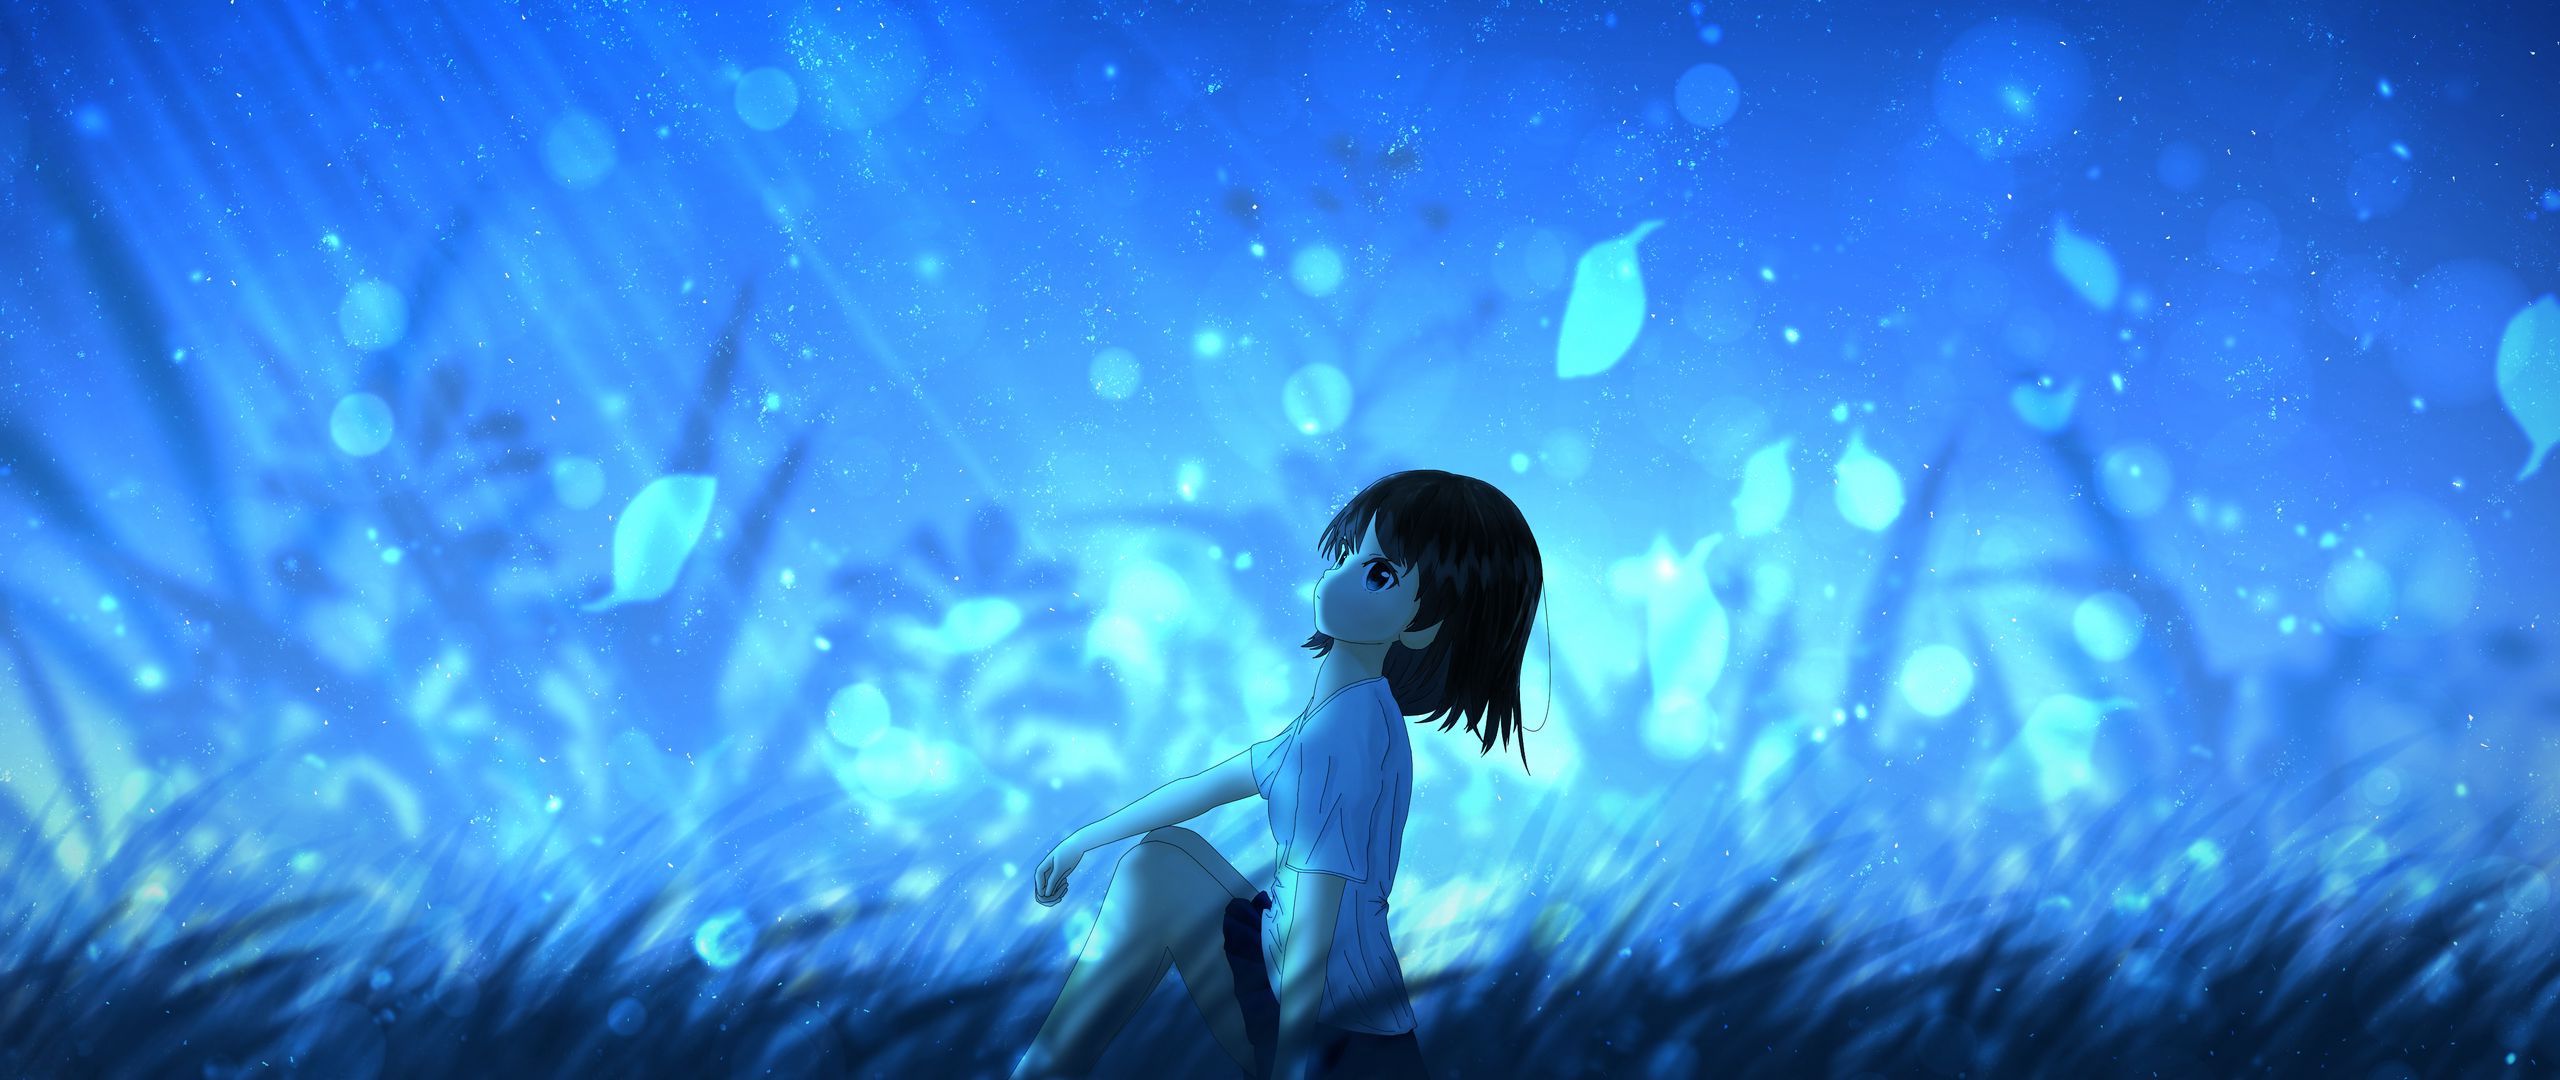 Download Wallpaper 2560x1080 Anime Girl Leaves Wind Dual Wide 1080p Hd Background